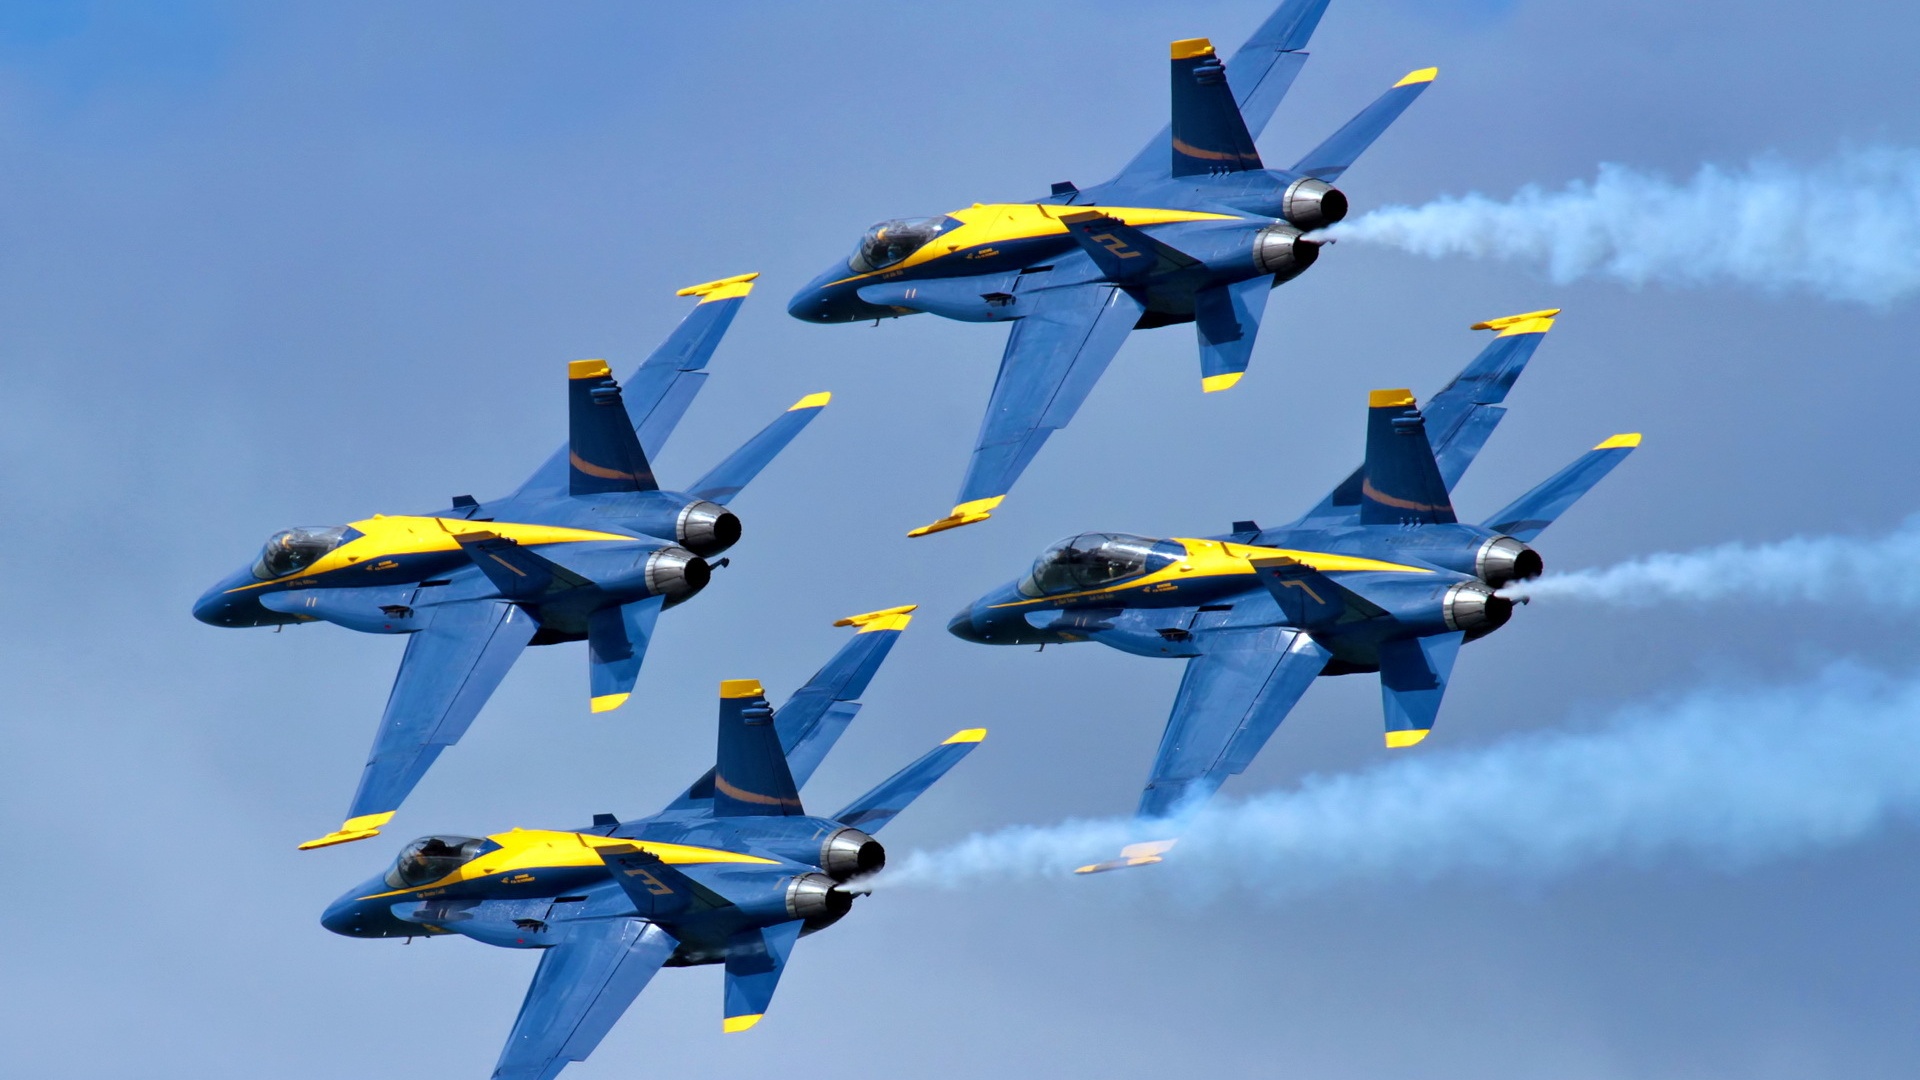 Wallpaper Blue Angels Aircraft HD Picture Image